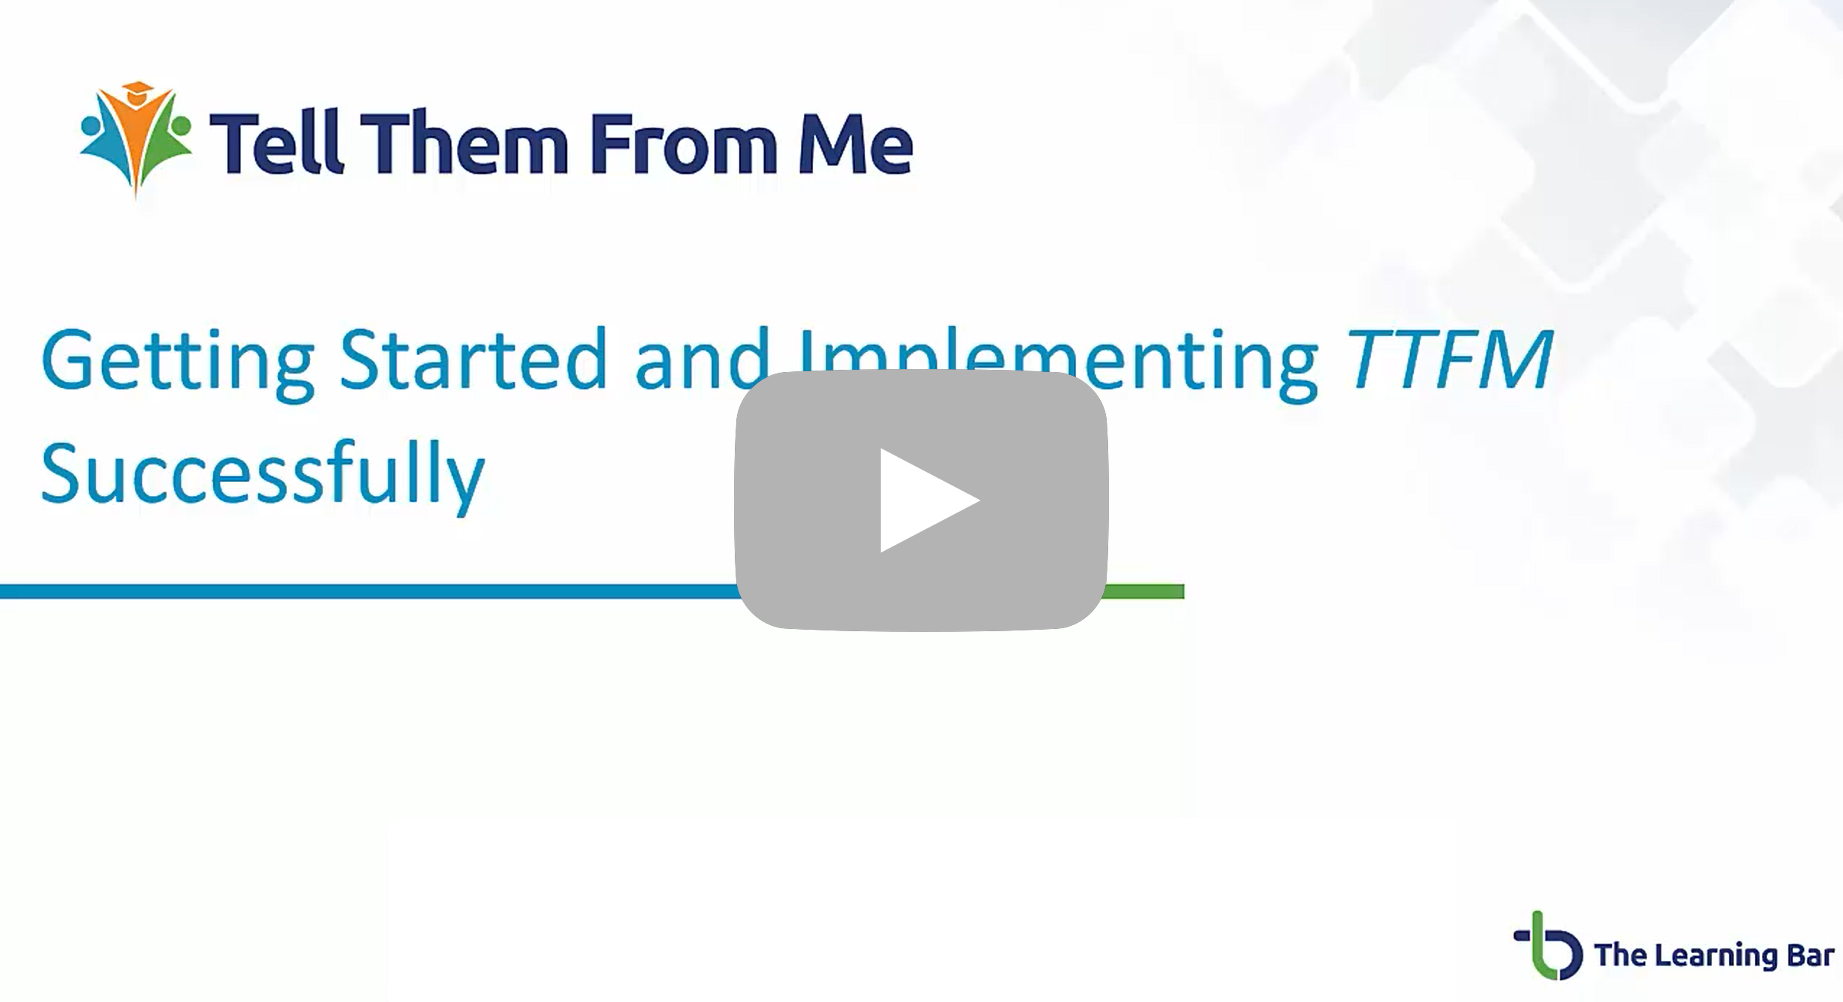 Getting Started and Implementing TTFM Successfully Video - 16 mins and 35 seconds